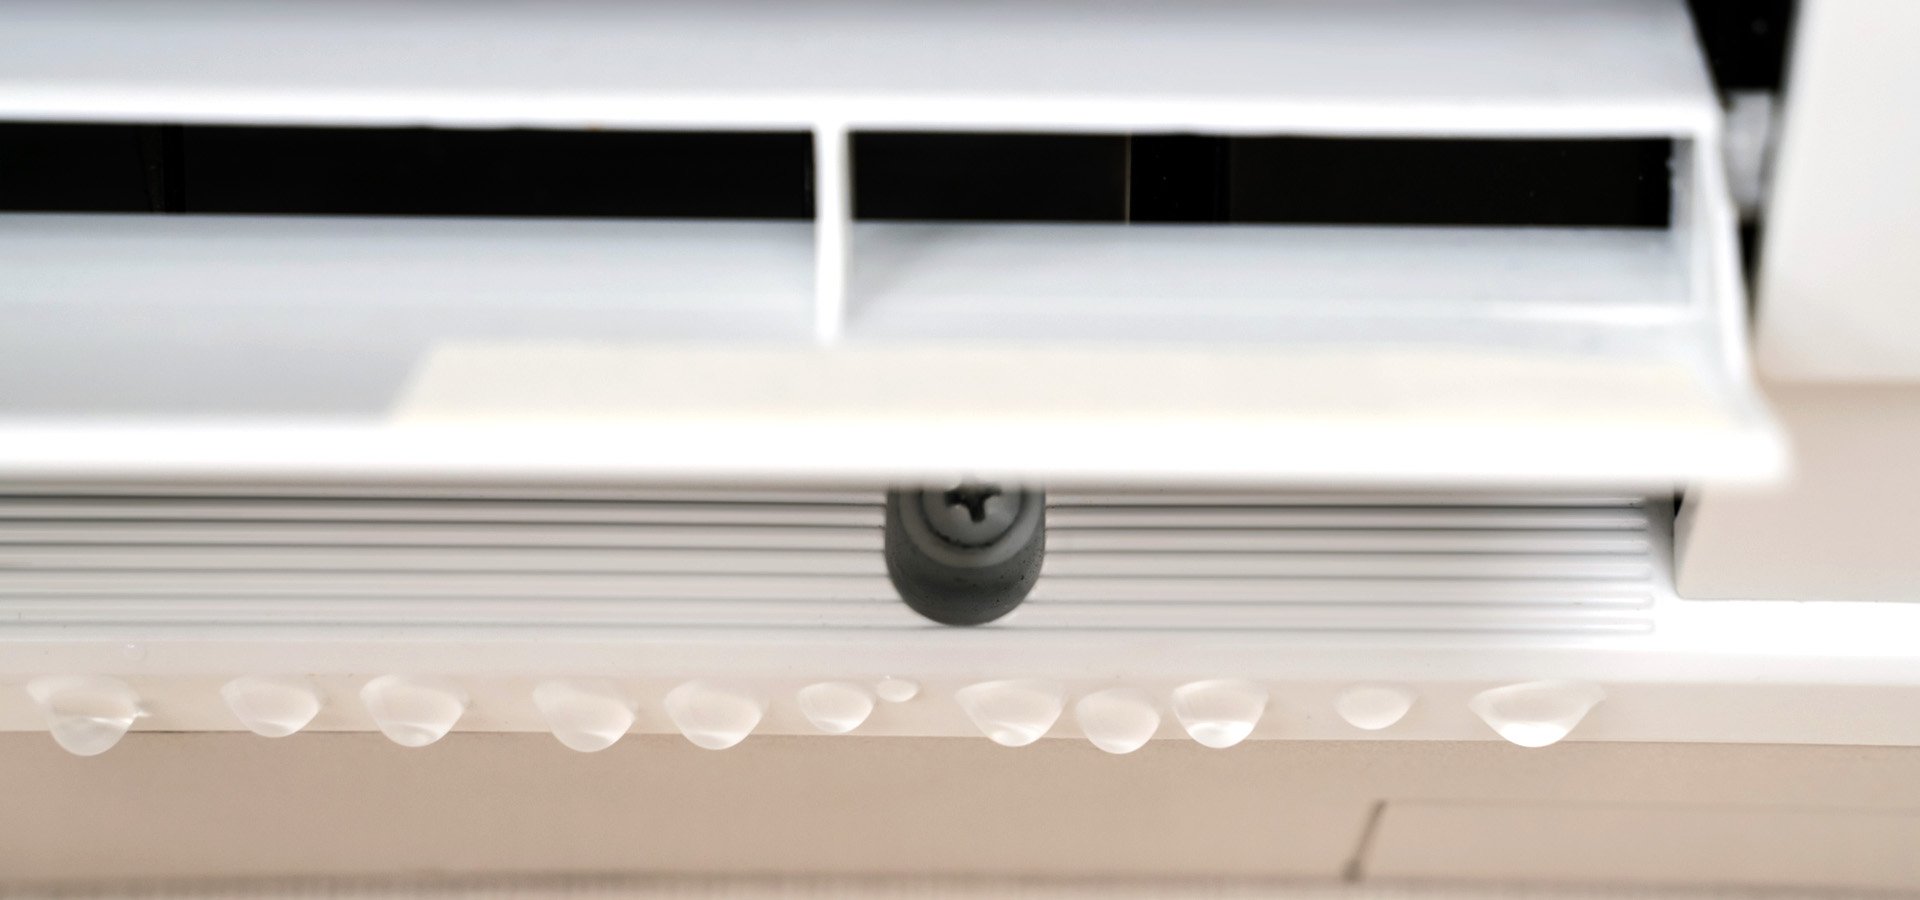 How To Stop An Air Conditioner From Leaking